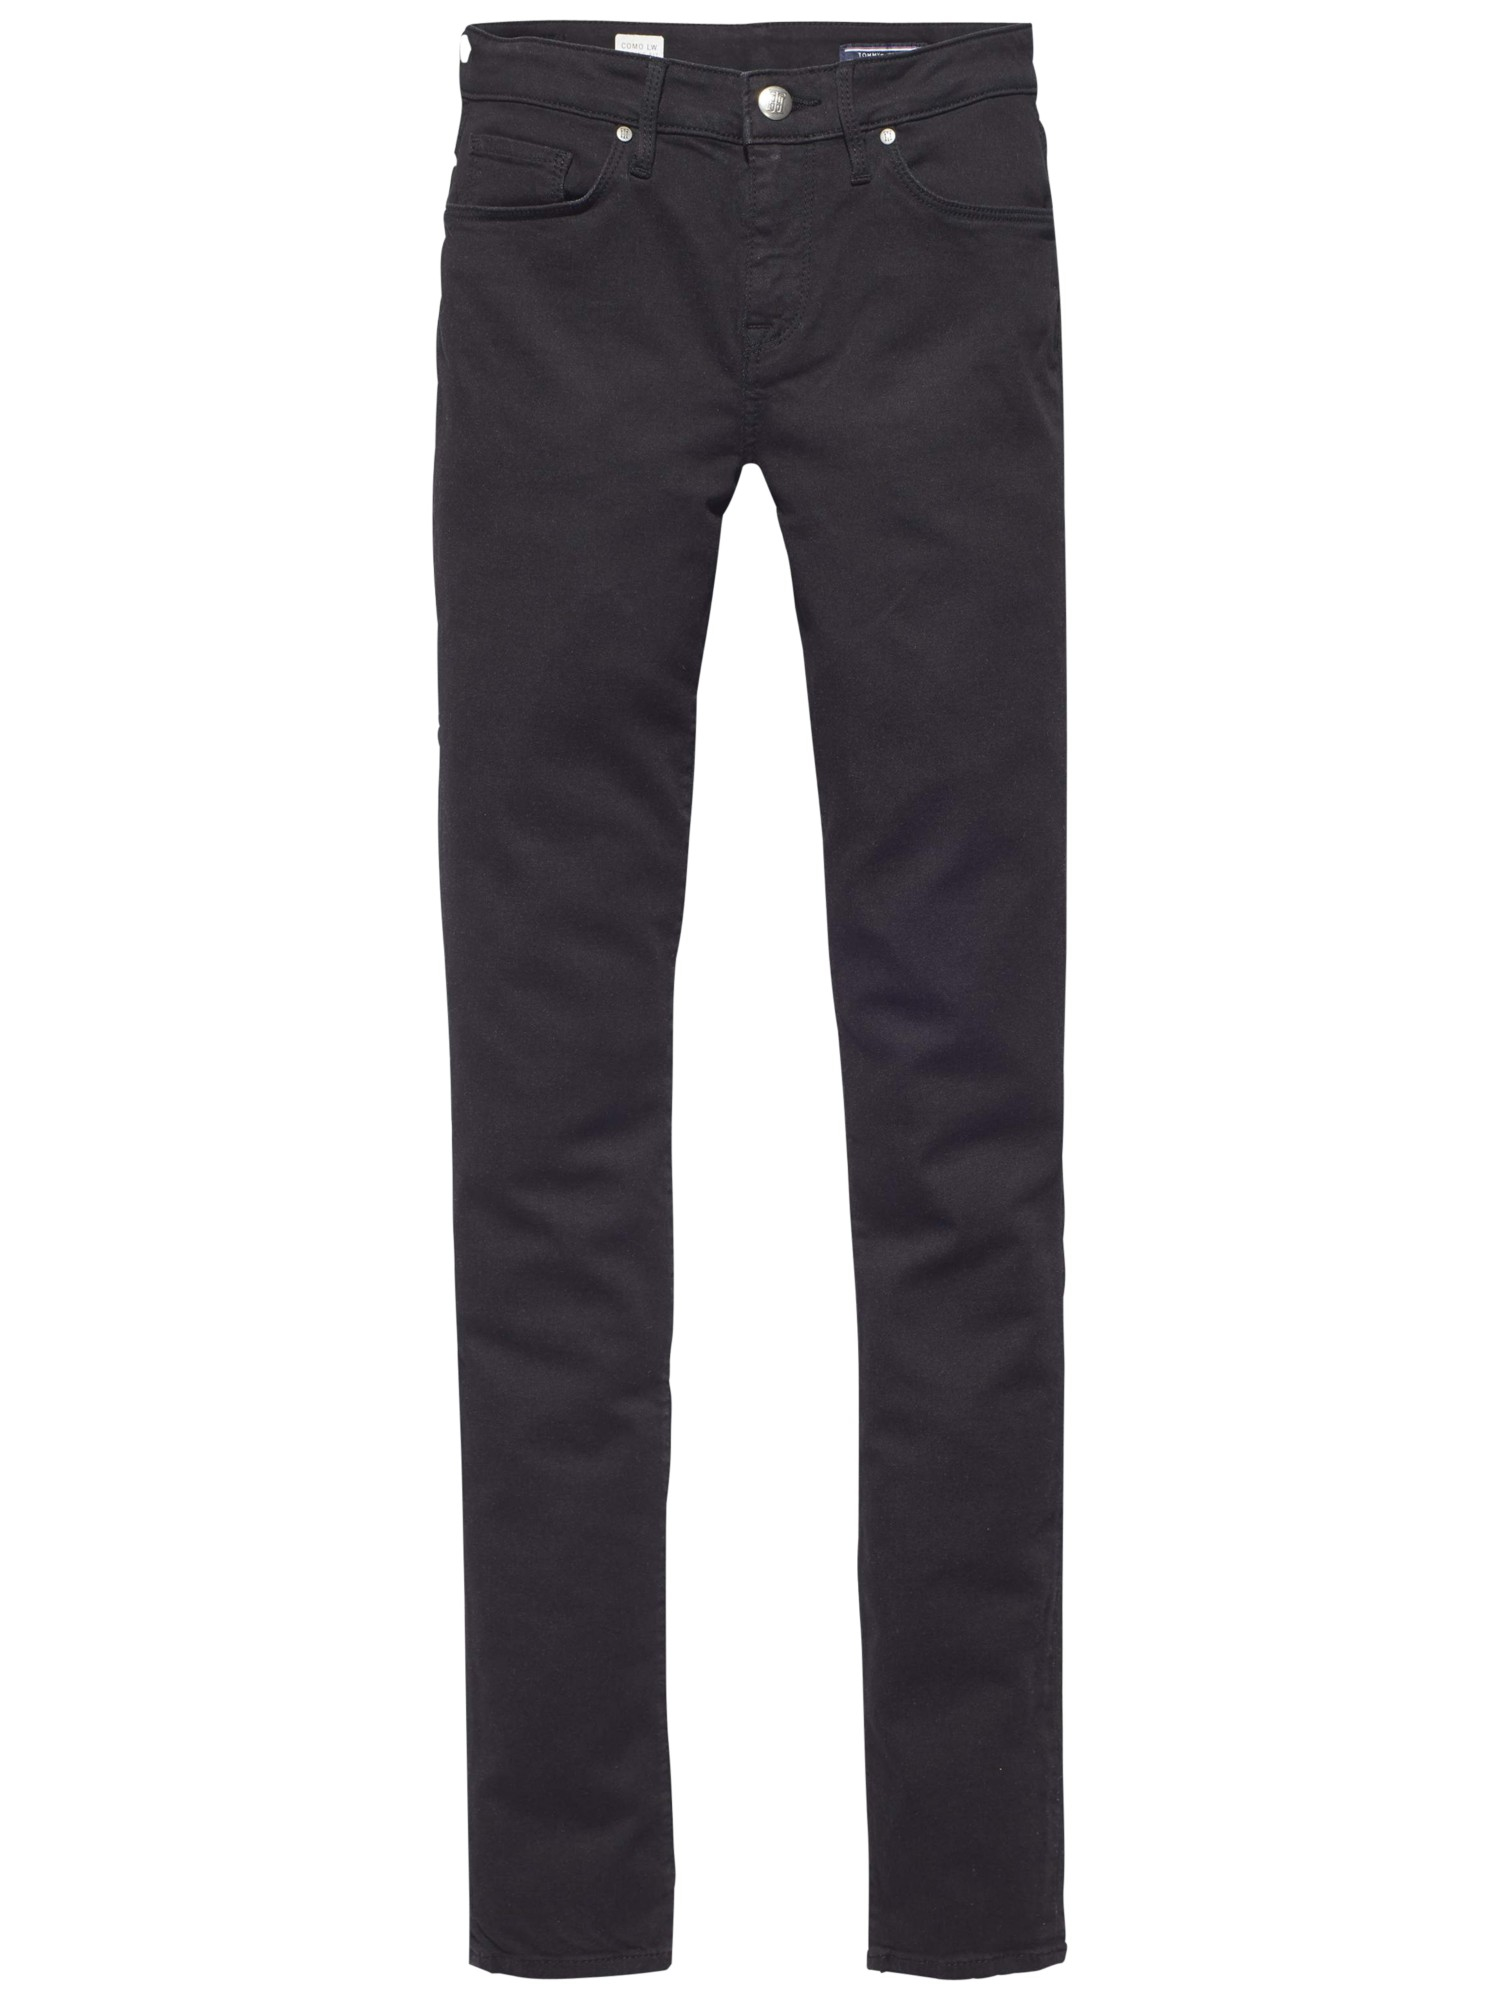 Tommy hilfiger Como Low Rise Super Skinny Jeans in Black | Lyst